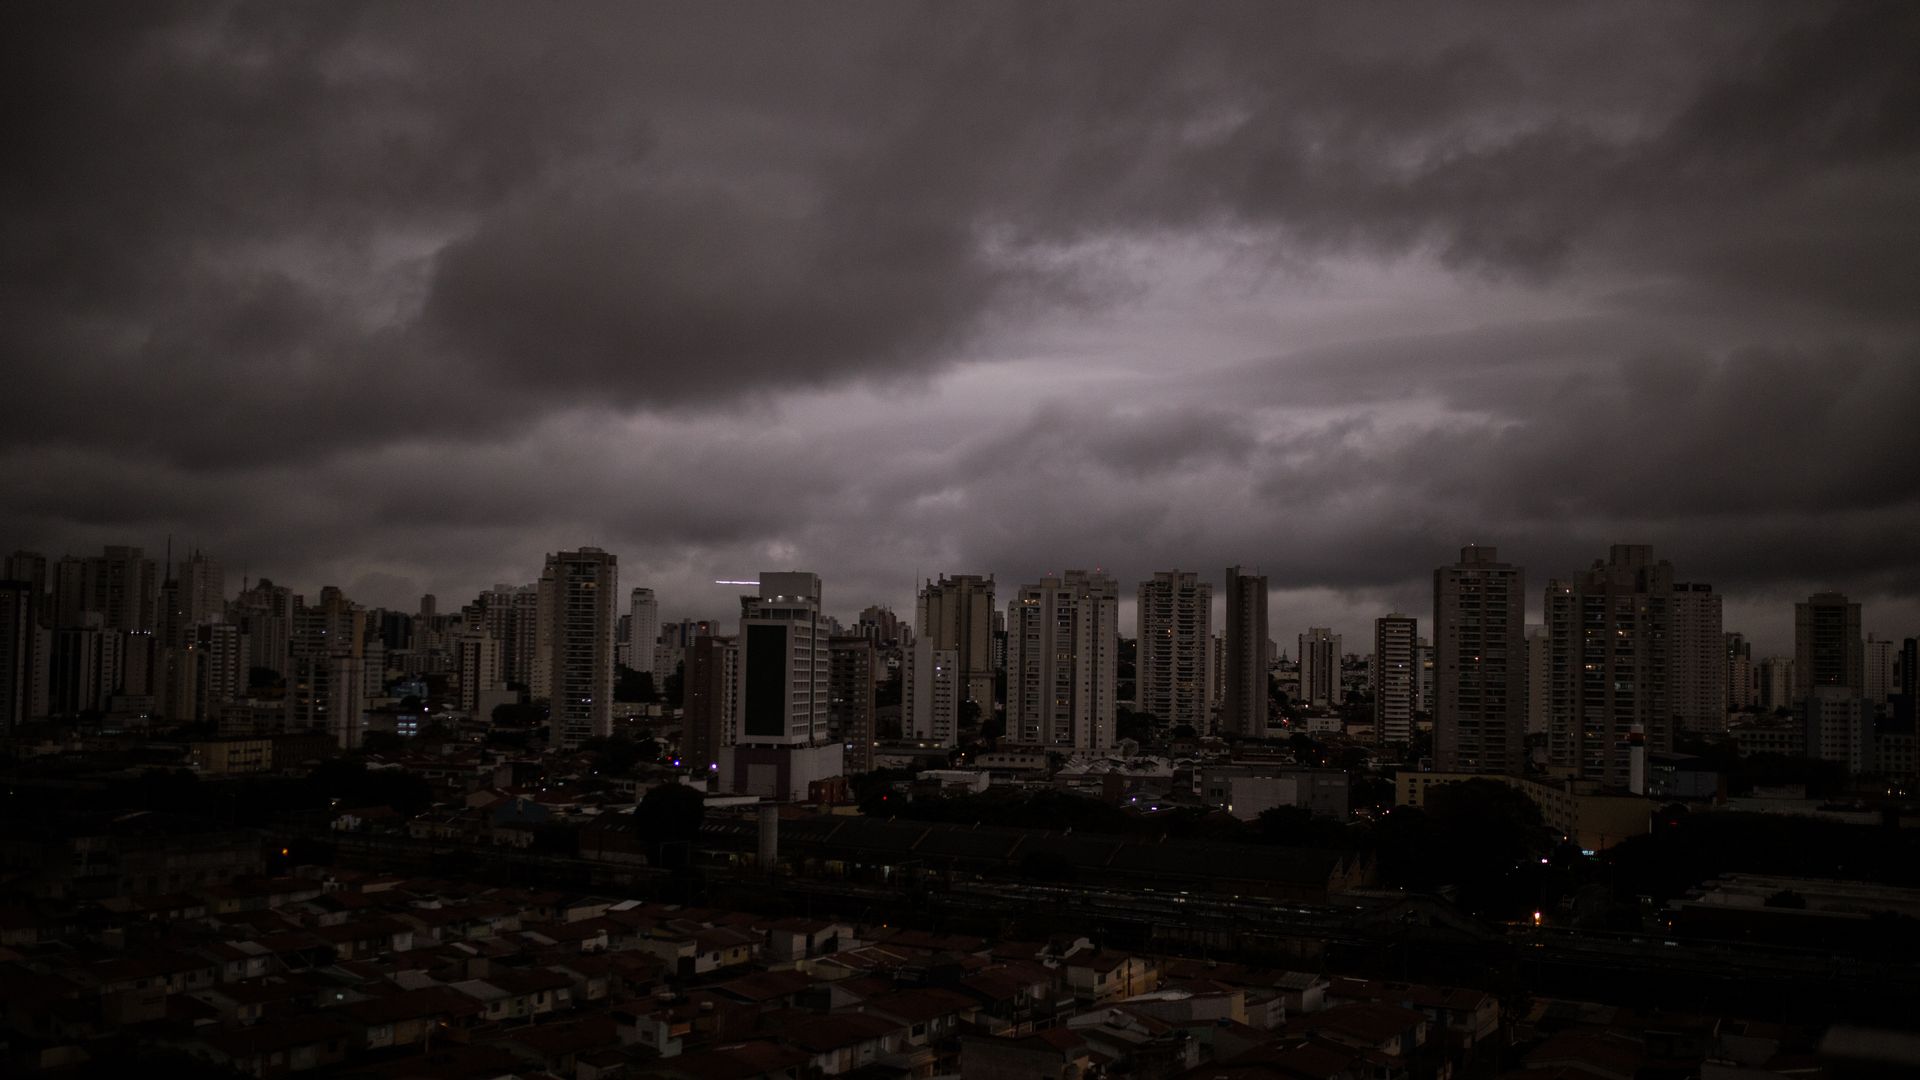 In this image, a darkened and cloudy skyline is seen over a dark city